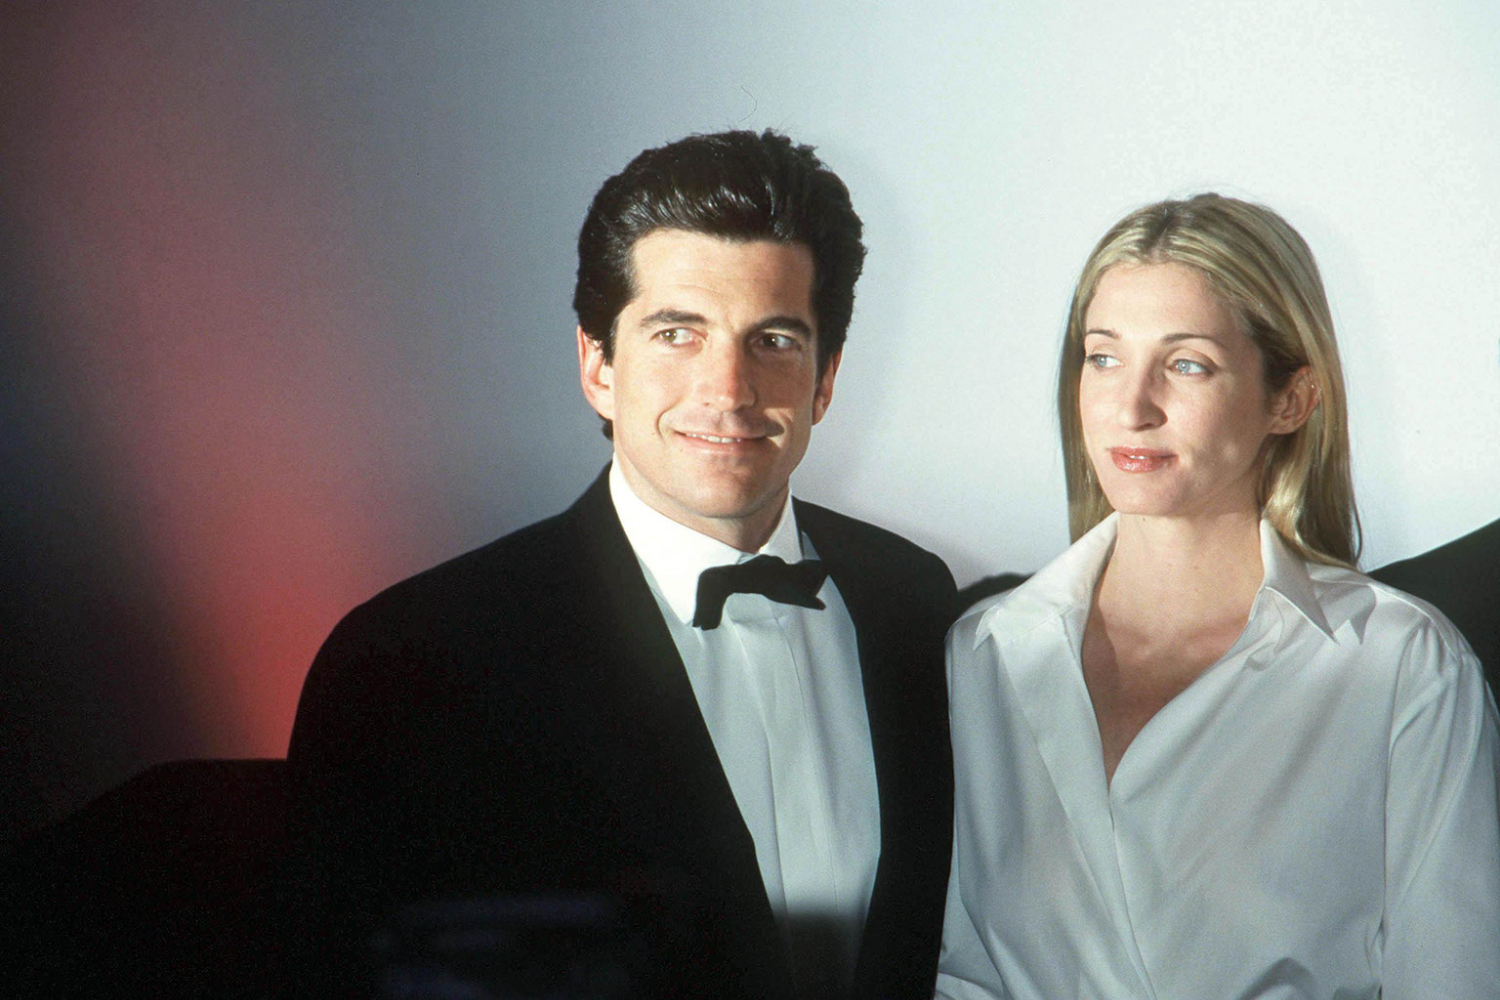 Carolyn Bessette left JFK Jr. furious after kissing another man, new book  claims